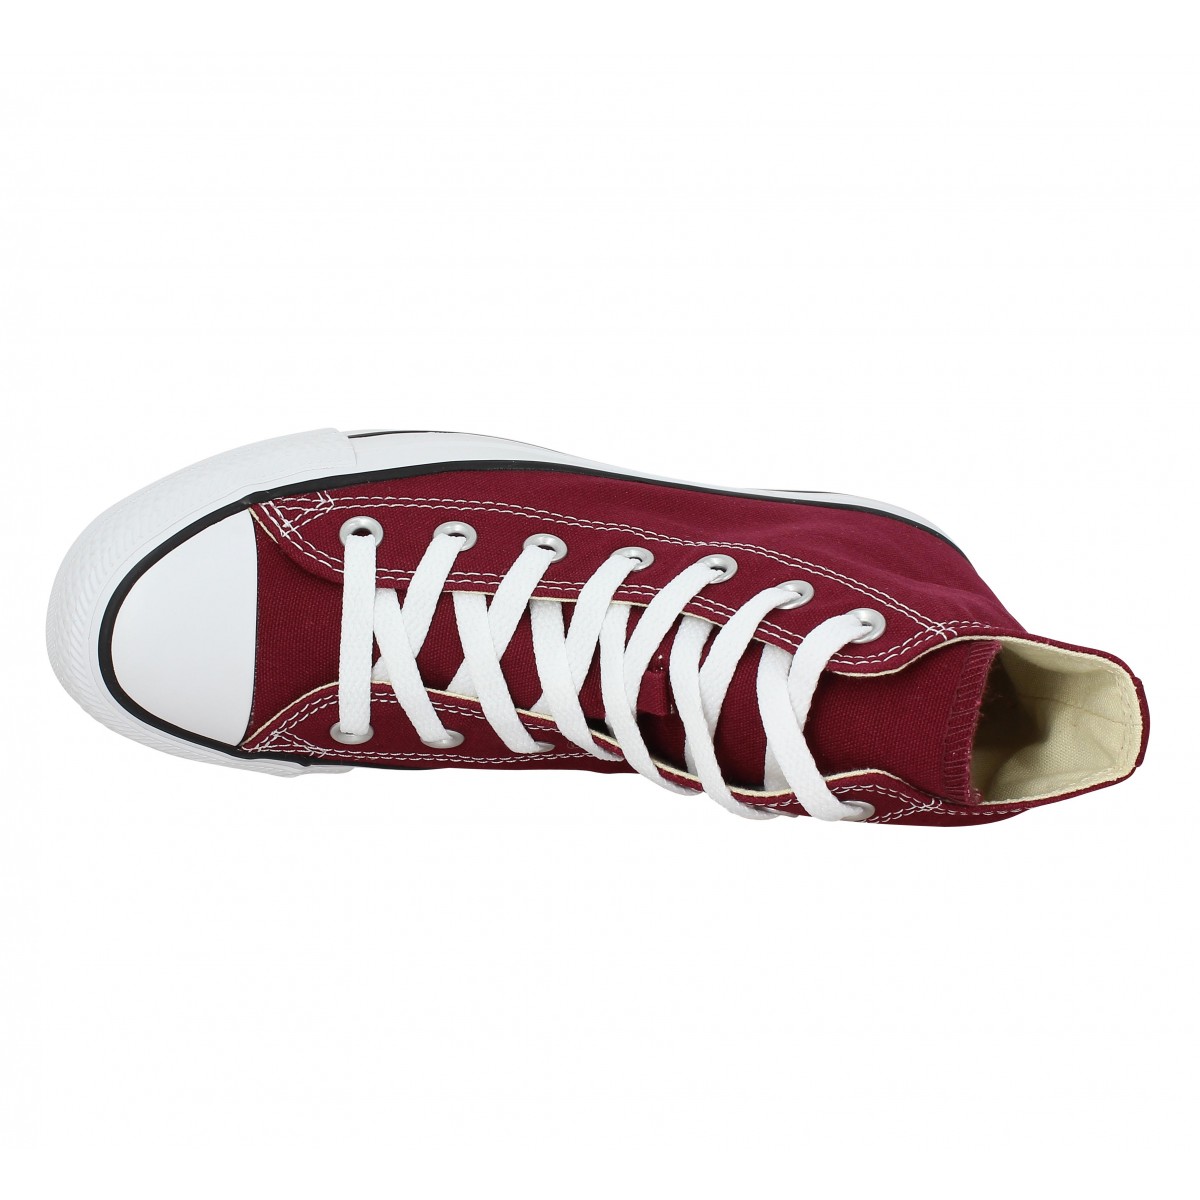 Chaussures Converse chuck taylor all star hi toile homme bordeaux ...